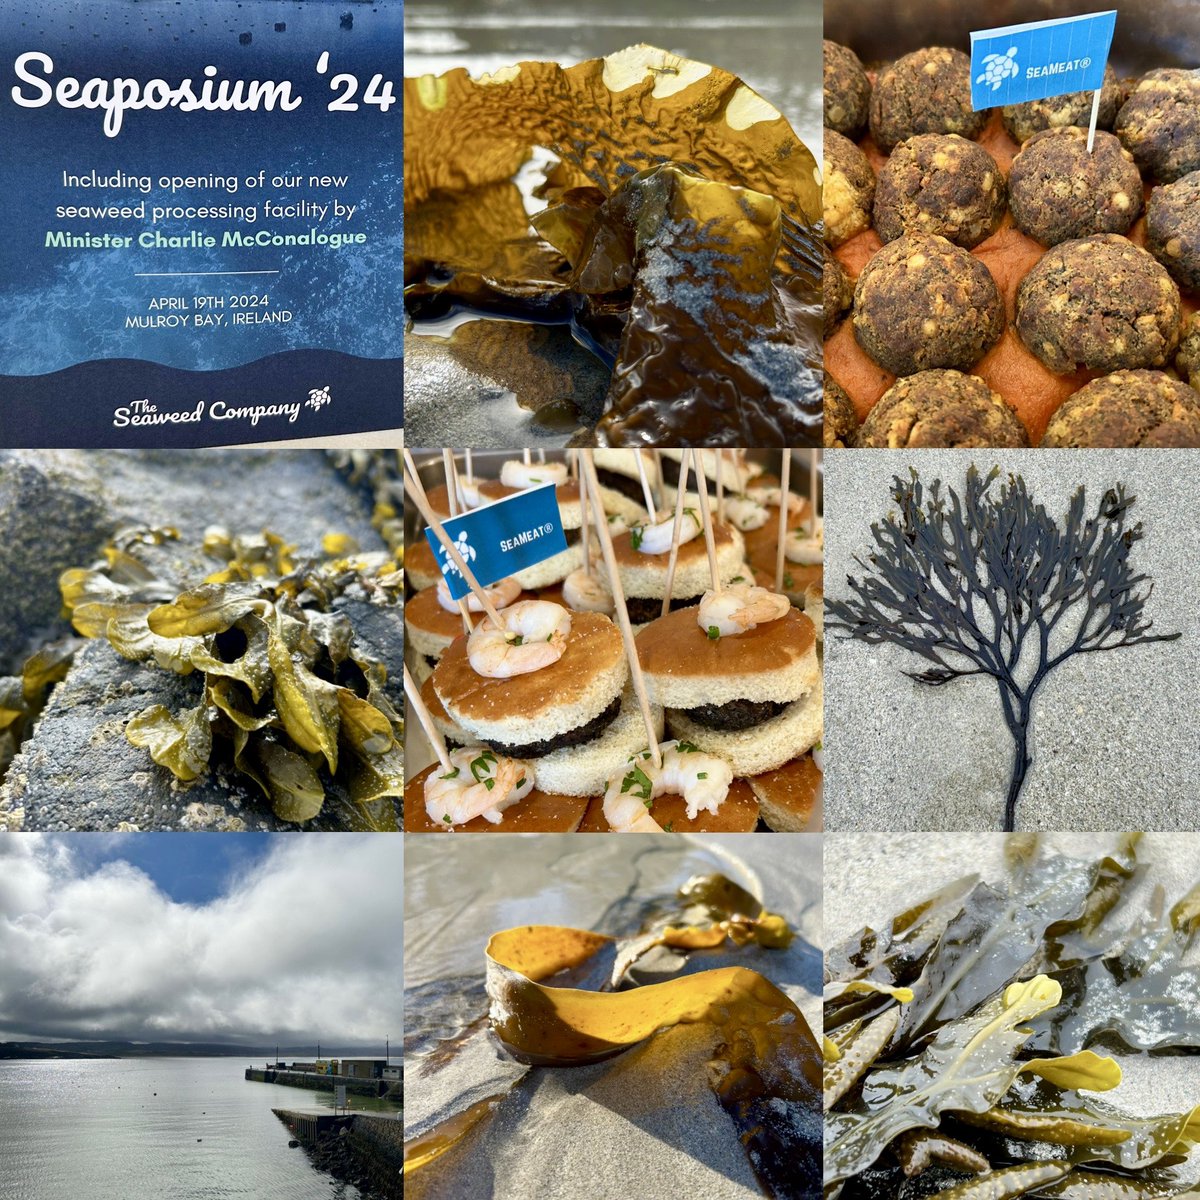 At yesterday's Seaposium in Downings Co. Donegal, organized by @TheSeaweedCo, I learned how seaweed-based food #seameat can lower the environmental impact & contribute to enhanced #Sustainability in #agriculture & in our food-system 🇮🇪🤝🇳🇱